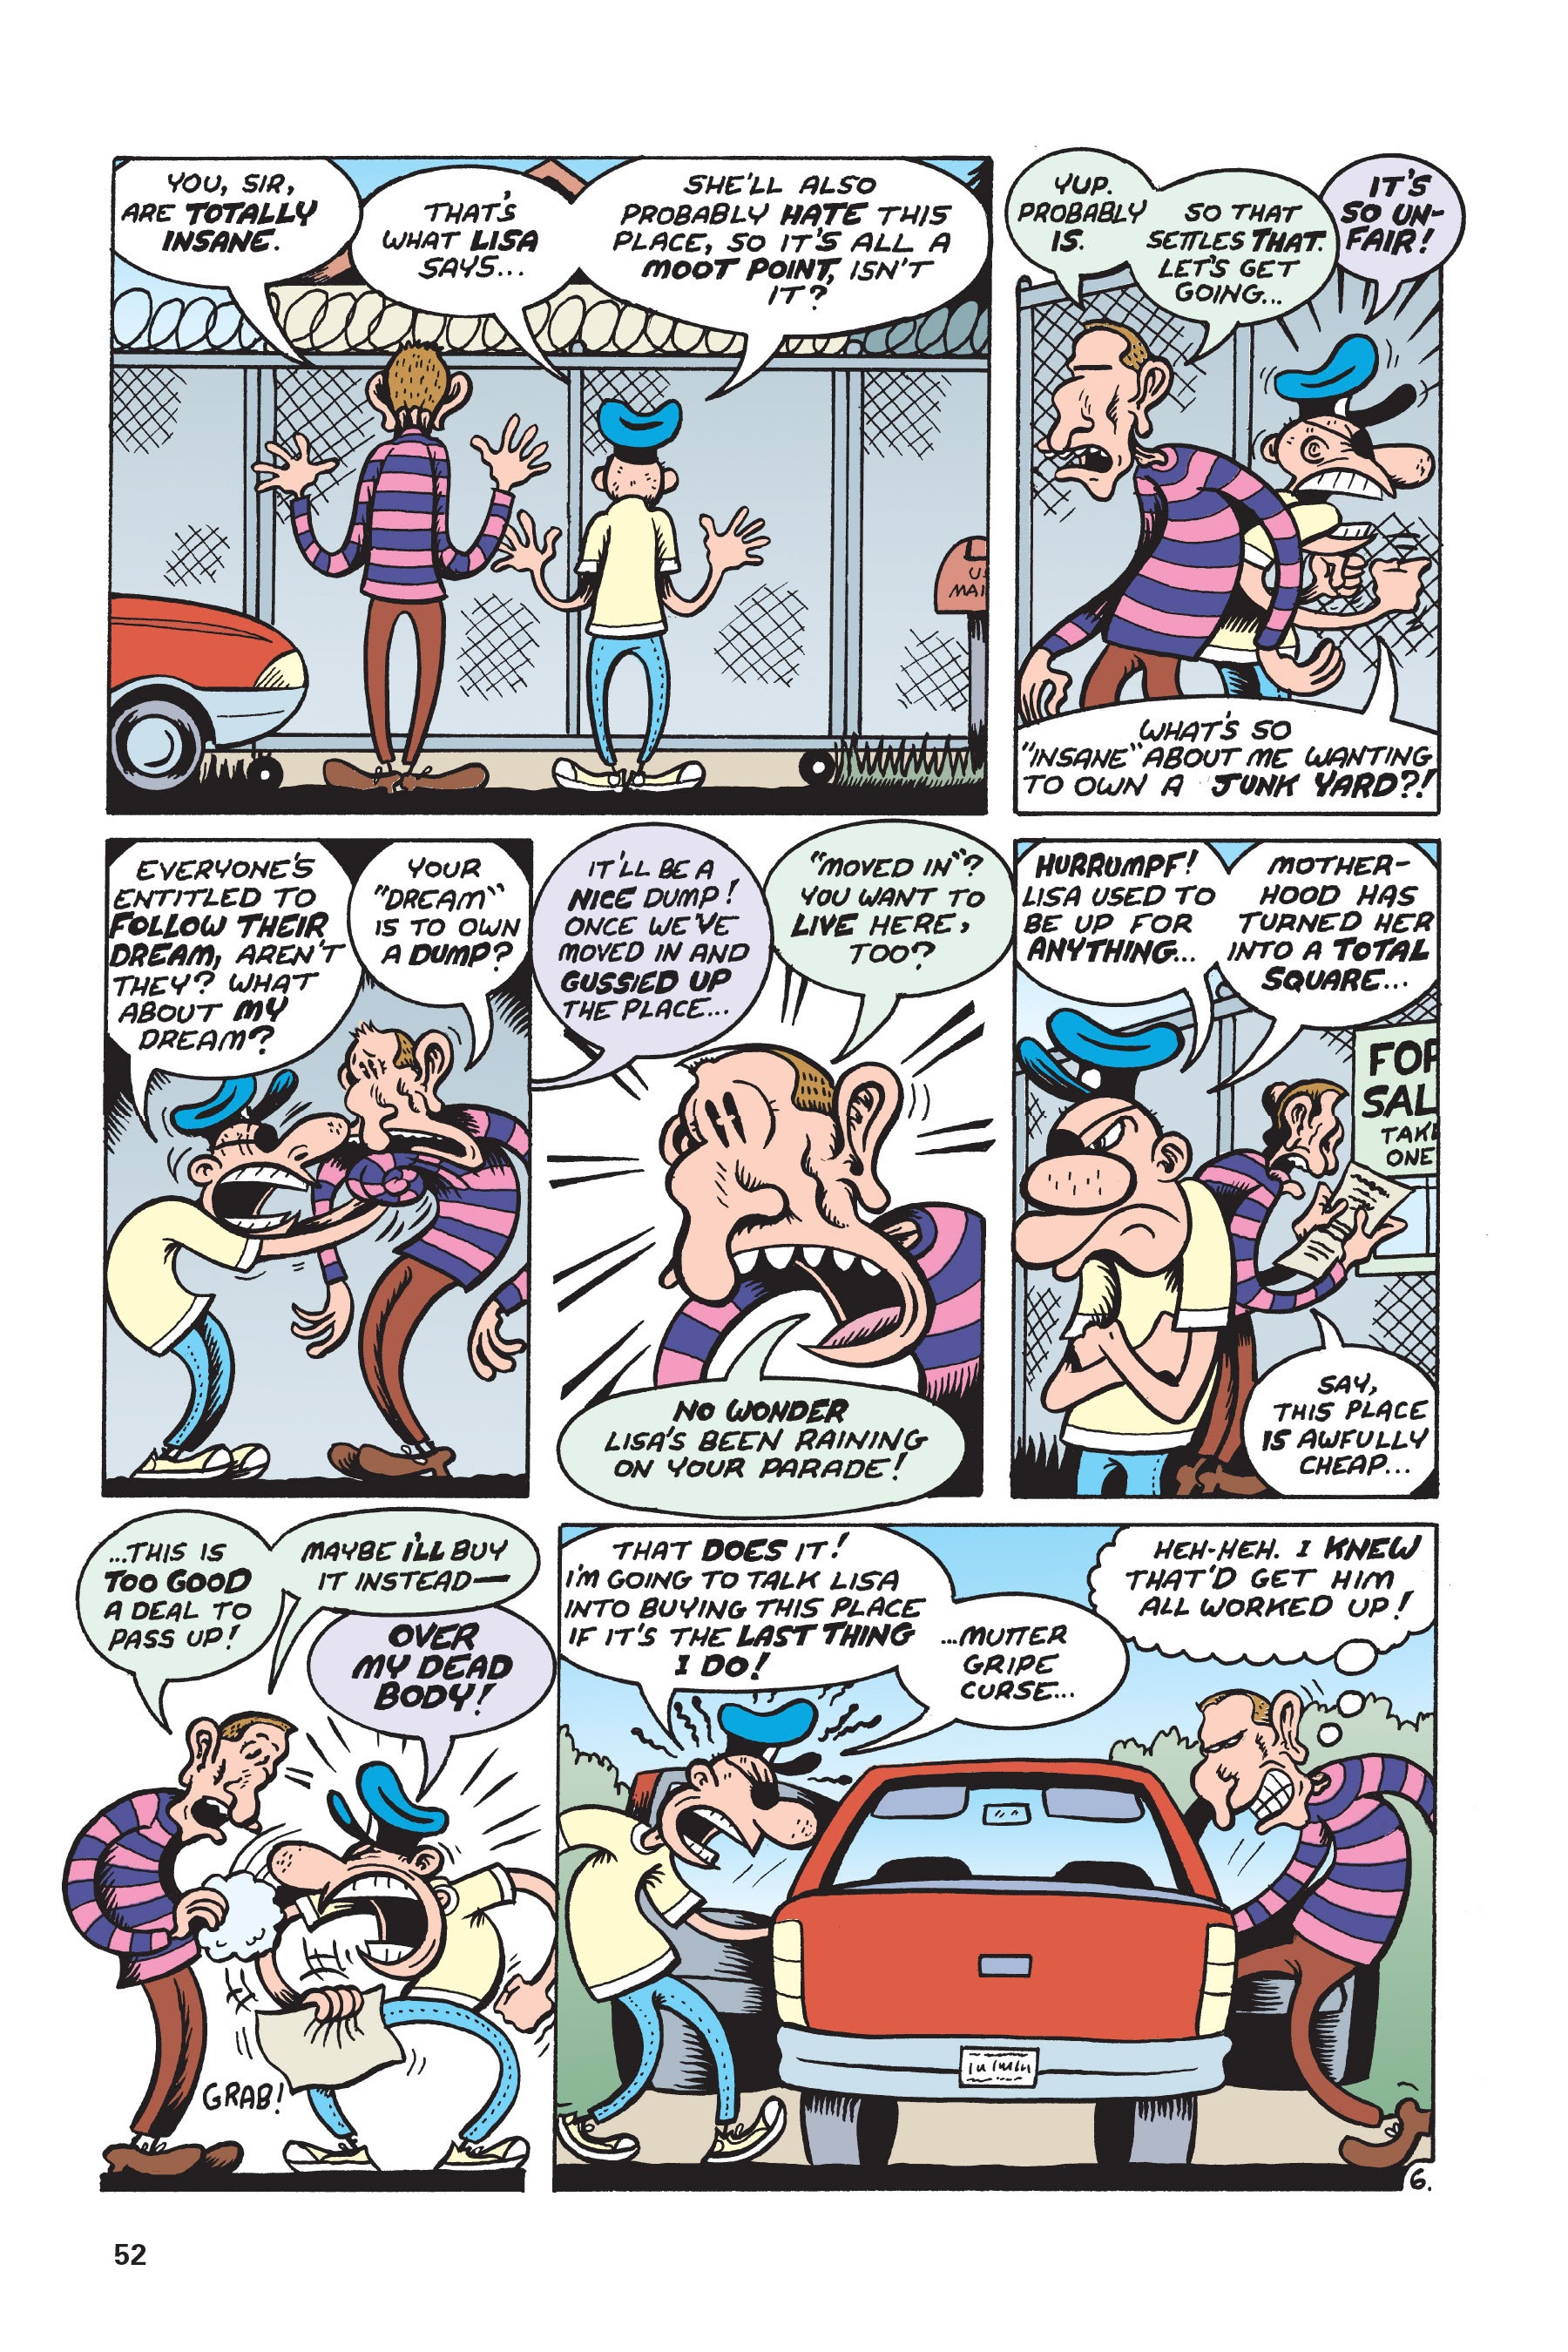 Read online Buddy Buys a Dump comic -  Issue # TPB - 52